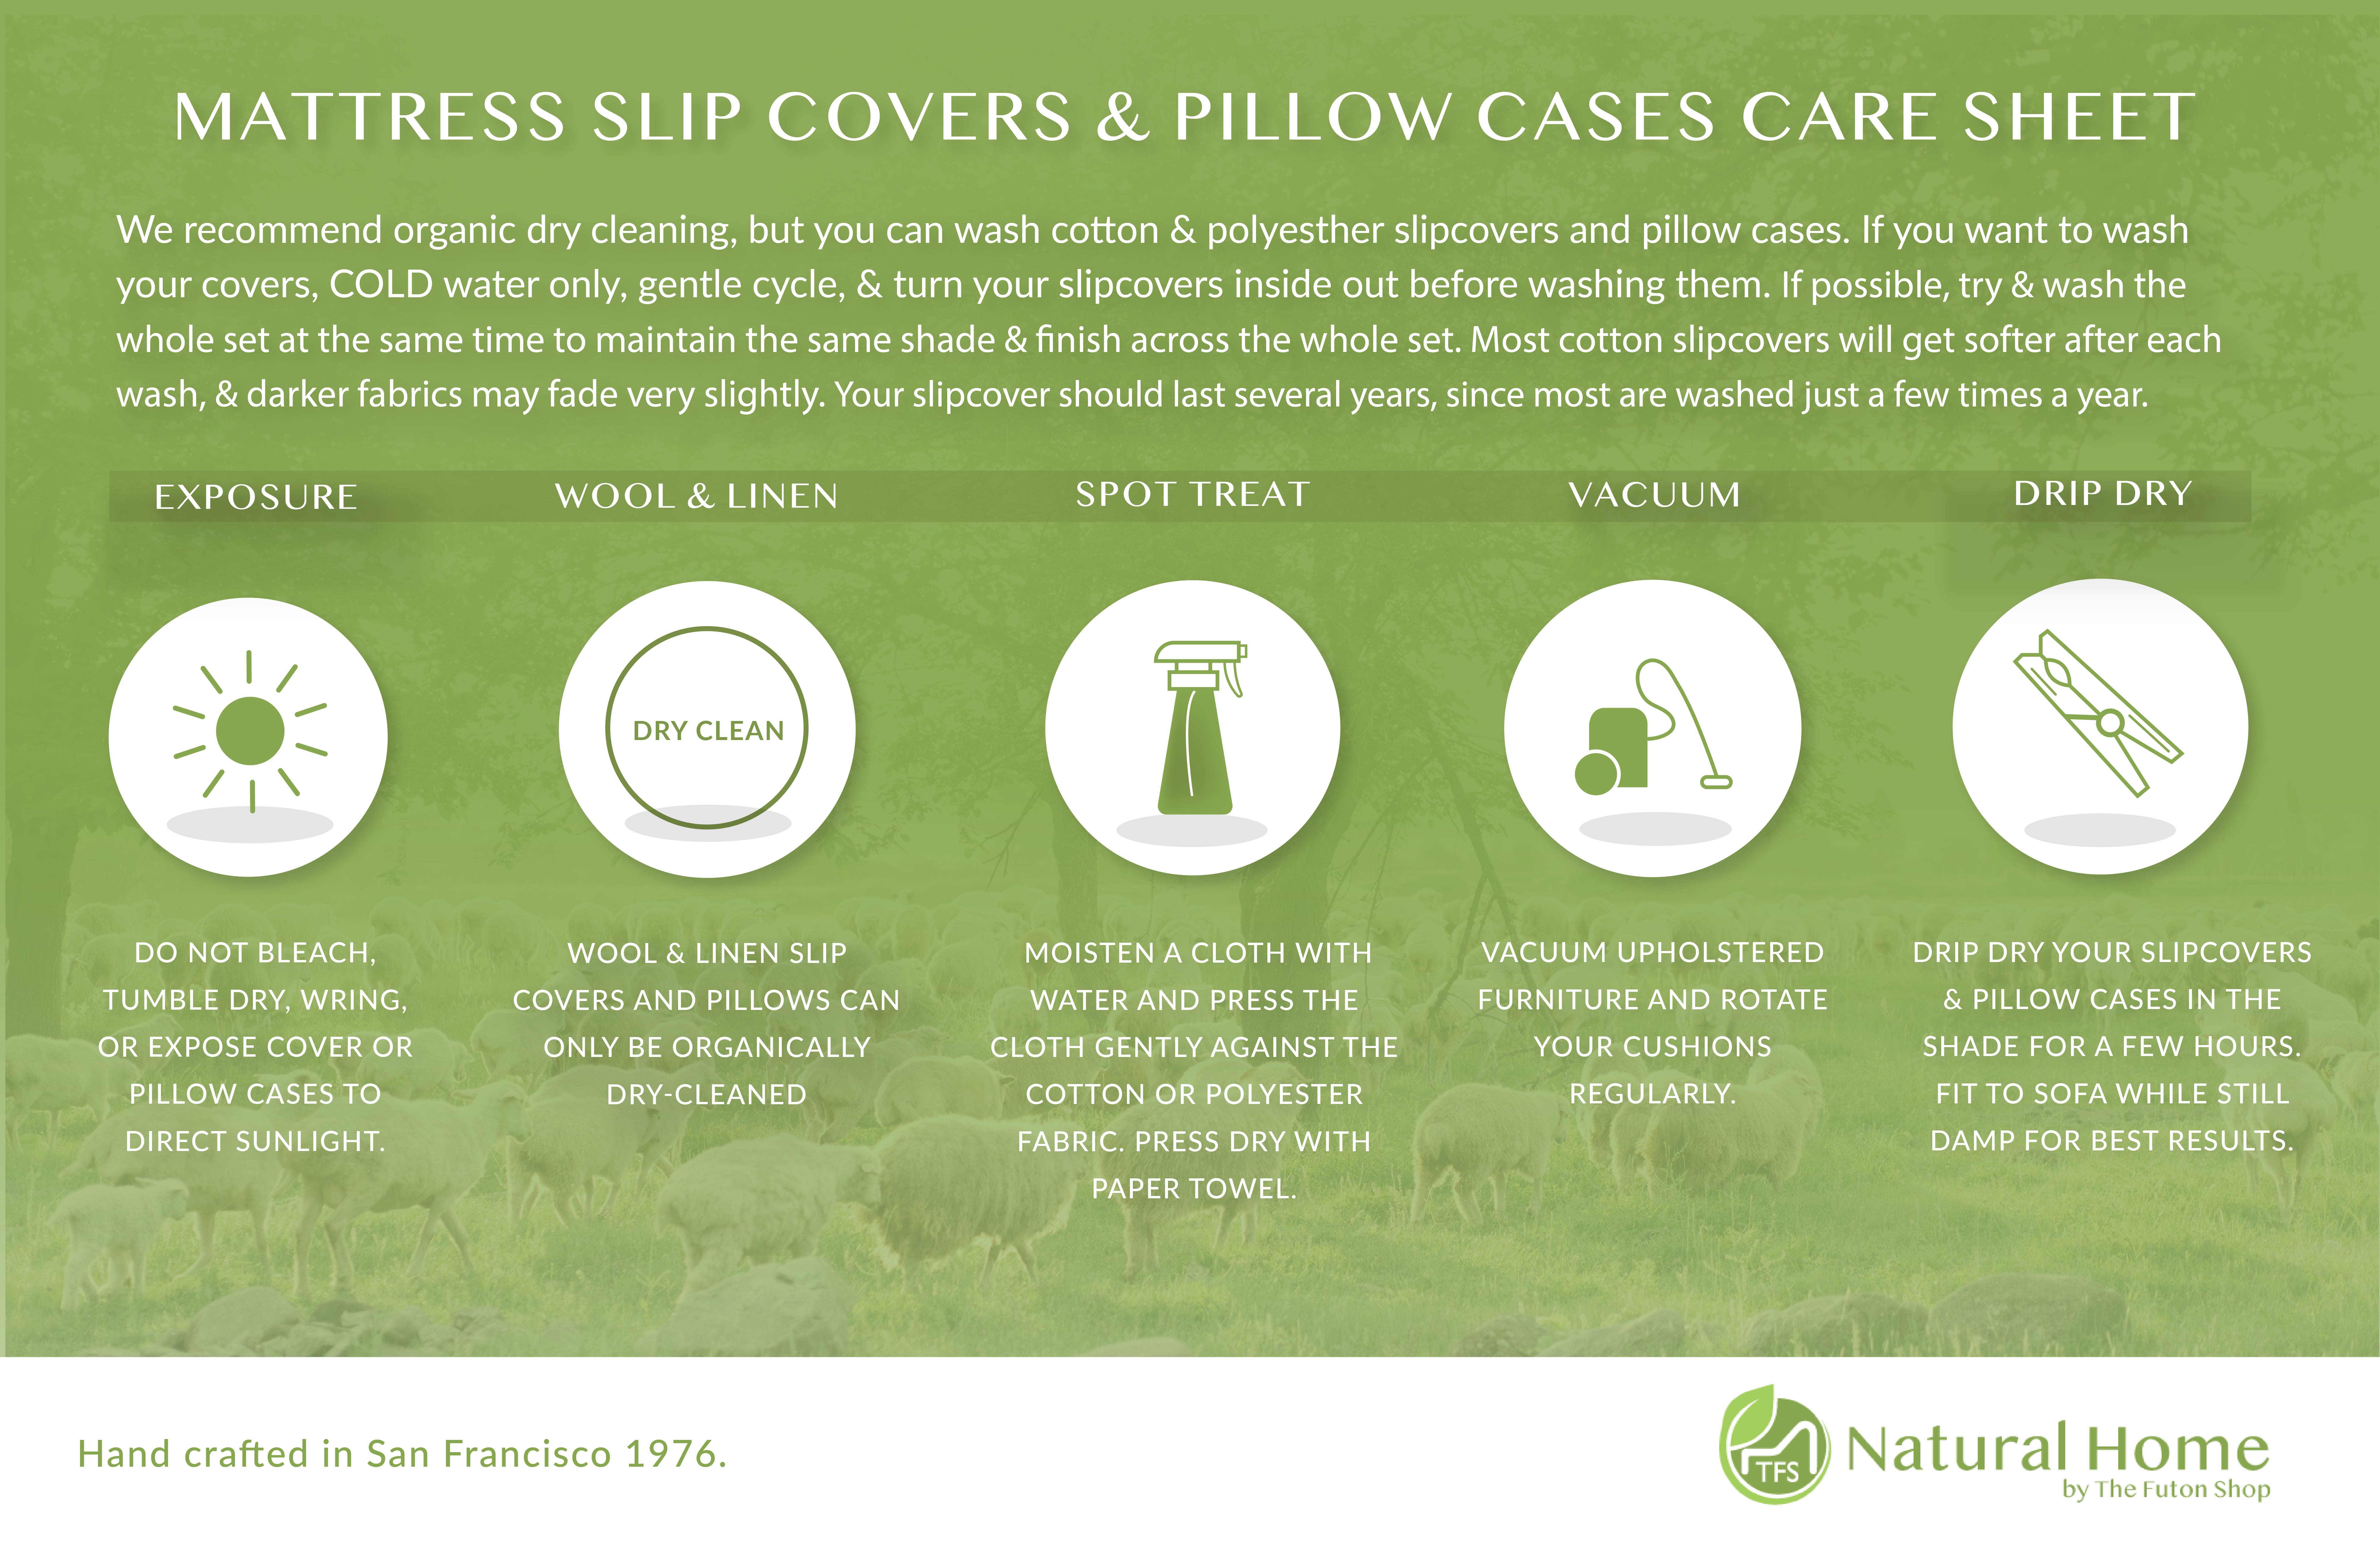 CARE INSTRUCTIONS FOR FUTON COVERS AND PILLOWS